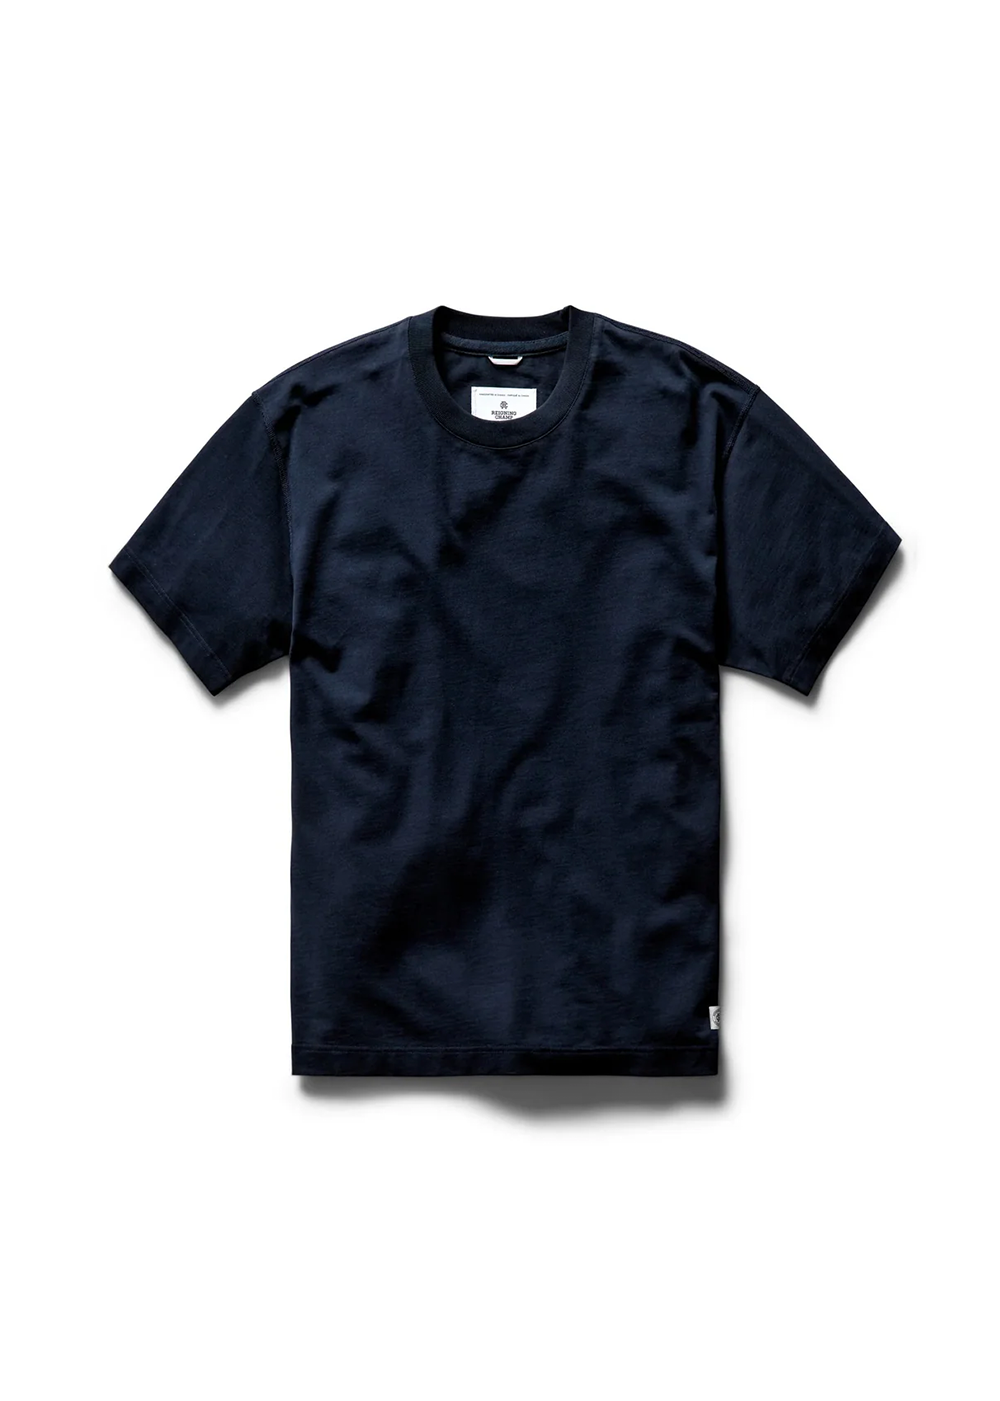 Midweight Jersey T-Shirt - Navy - Reigning Champ Canada - Danali - RC-1311